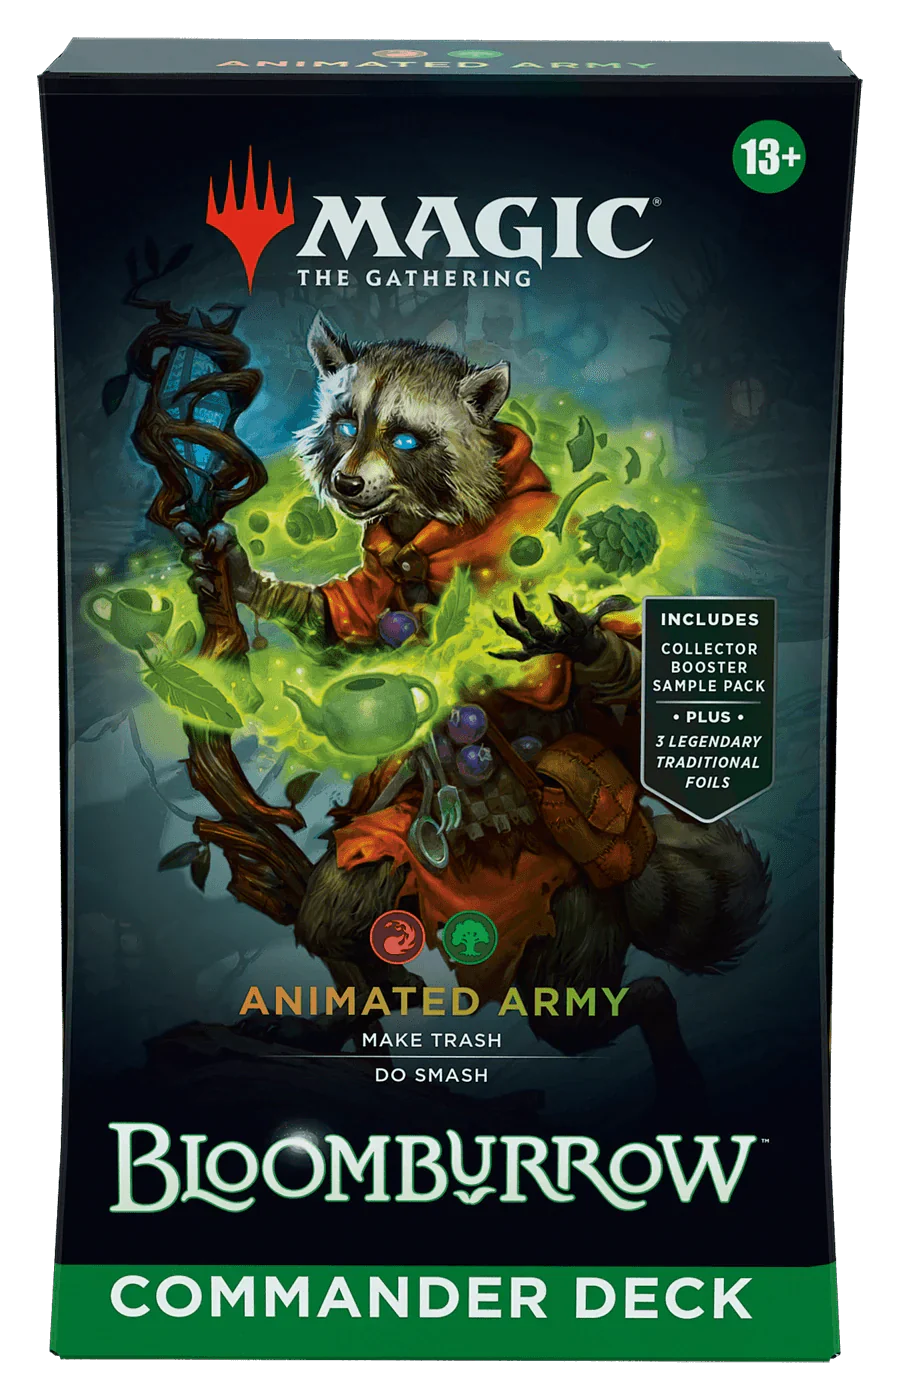 Magic: The Gathering - Bloomburrow - Commander Deck - Animated Army